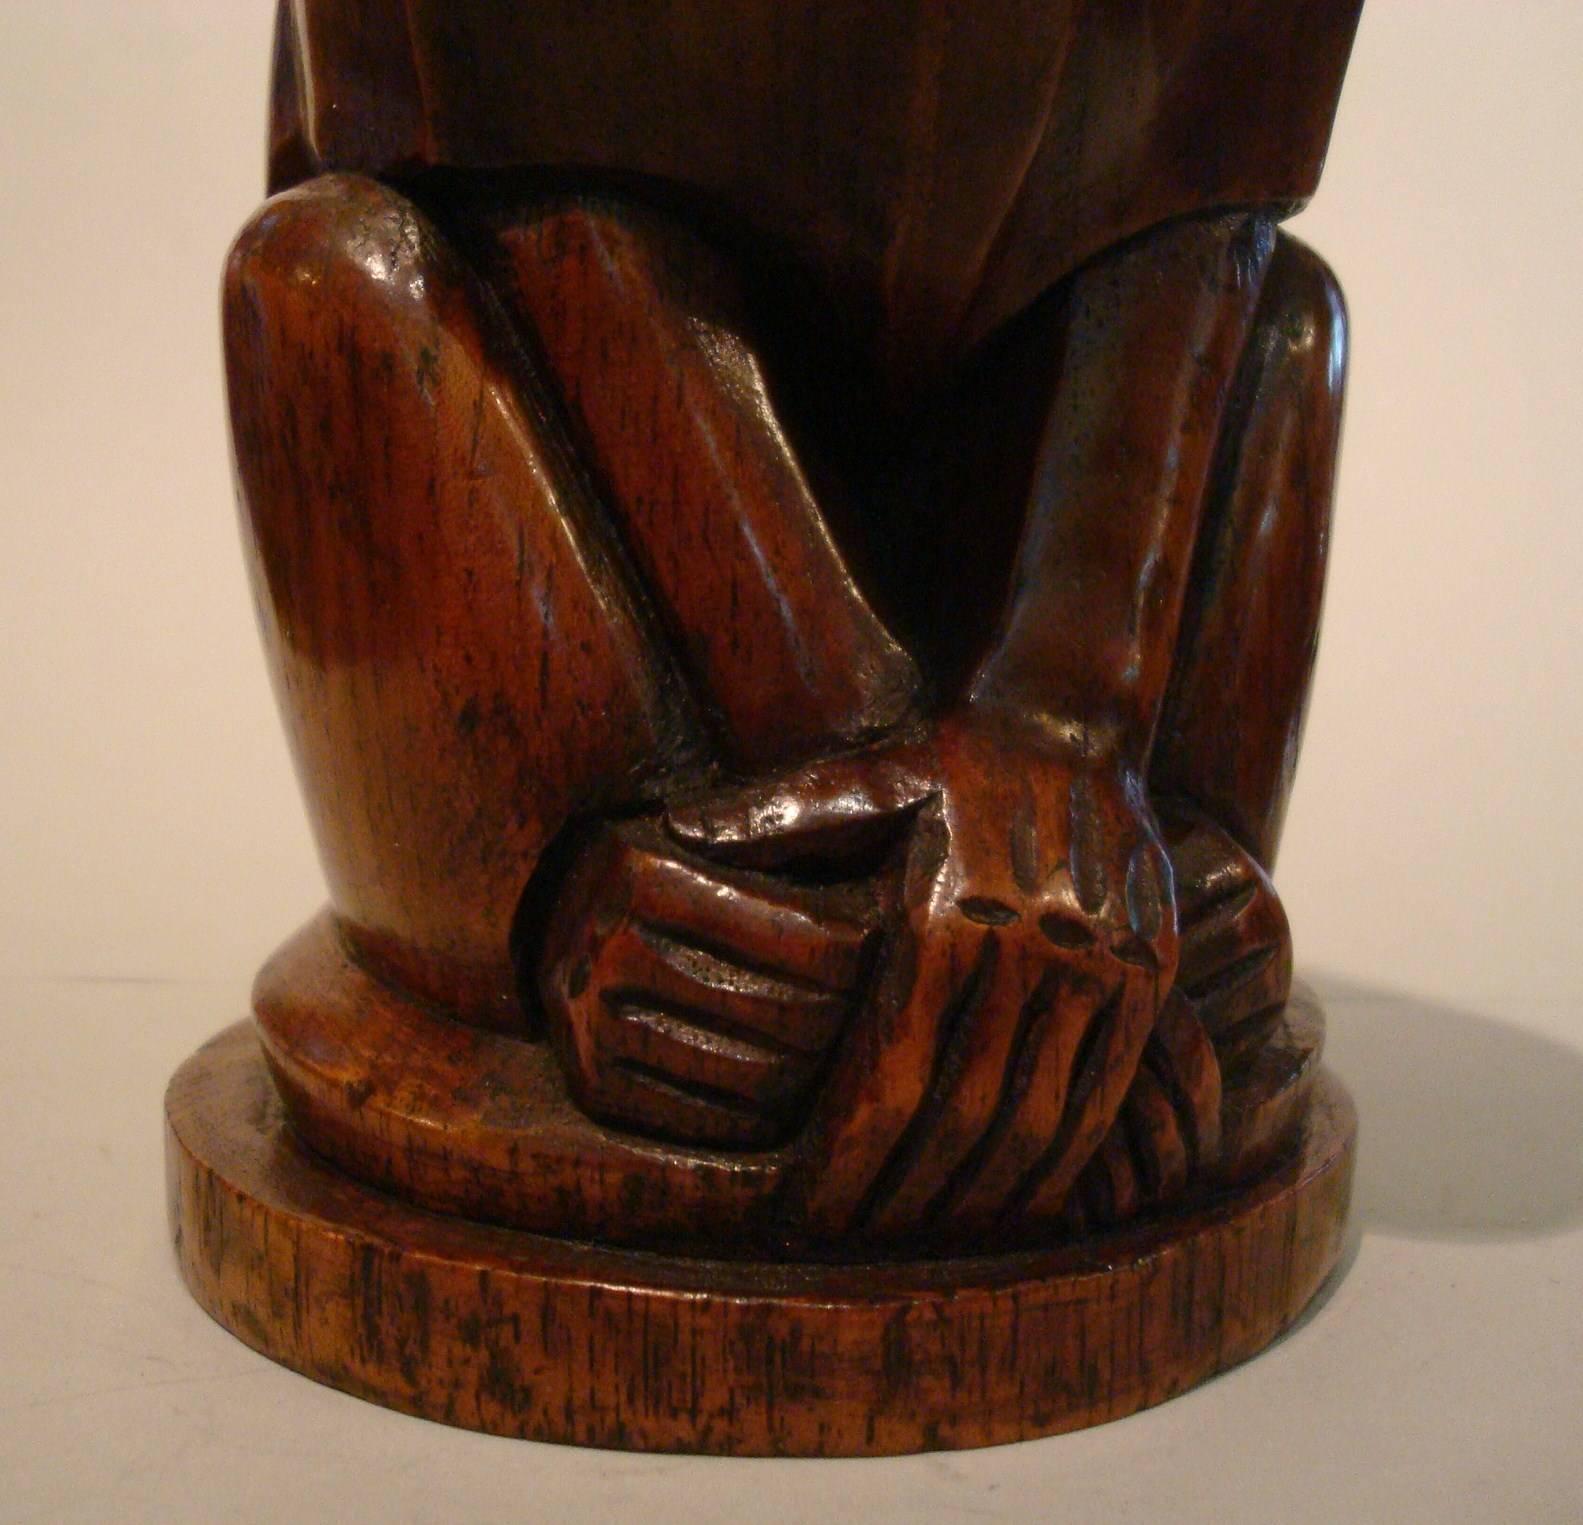 Very Nice hand-carved wooden monkey, in the manner of Sandoz.
It has a bronze label that says Le Petite Singe *24.
Under the sculpture it is signed with the French Export mark, Made in France. Also stamped 226 and 33.